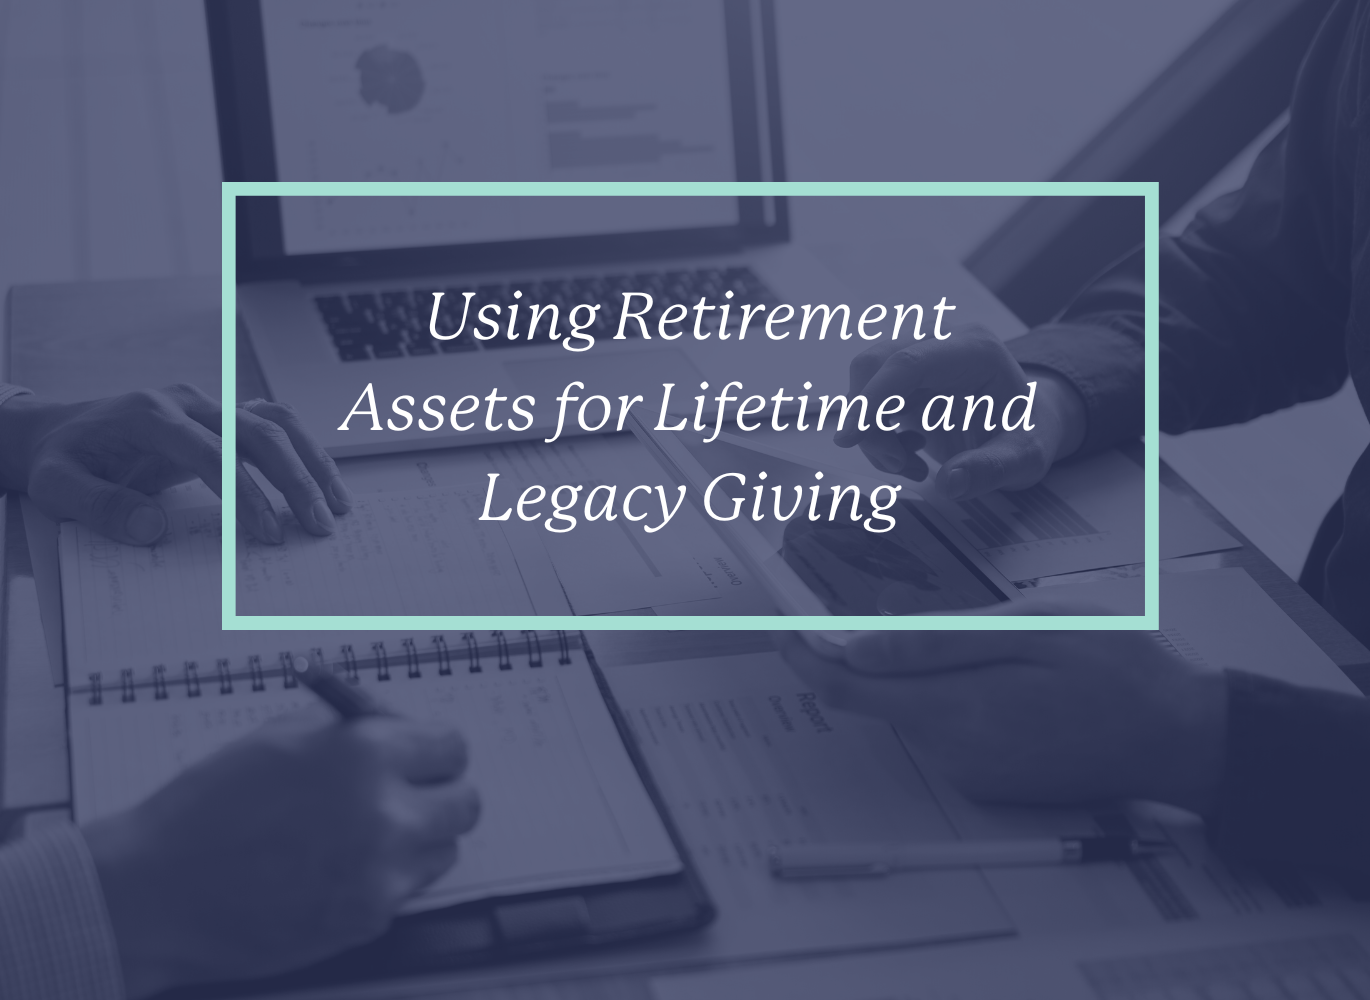 Photo that states "Using Retirement Assets for Lifetime and Legacy Giving" with a meeting in the background